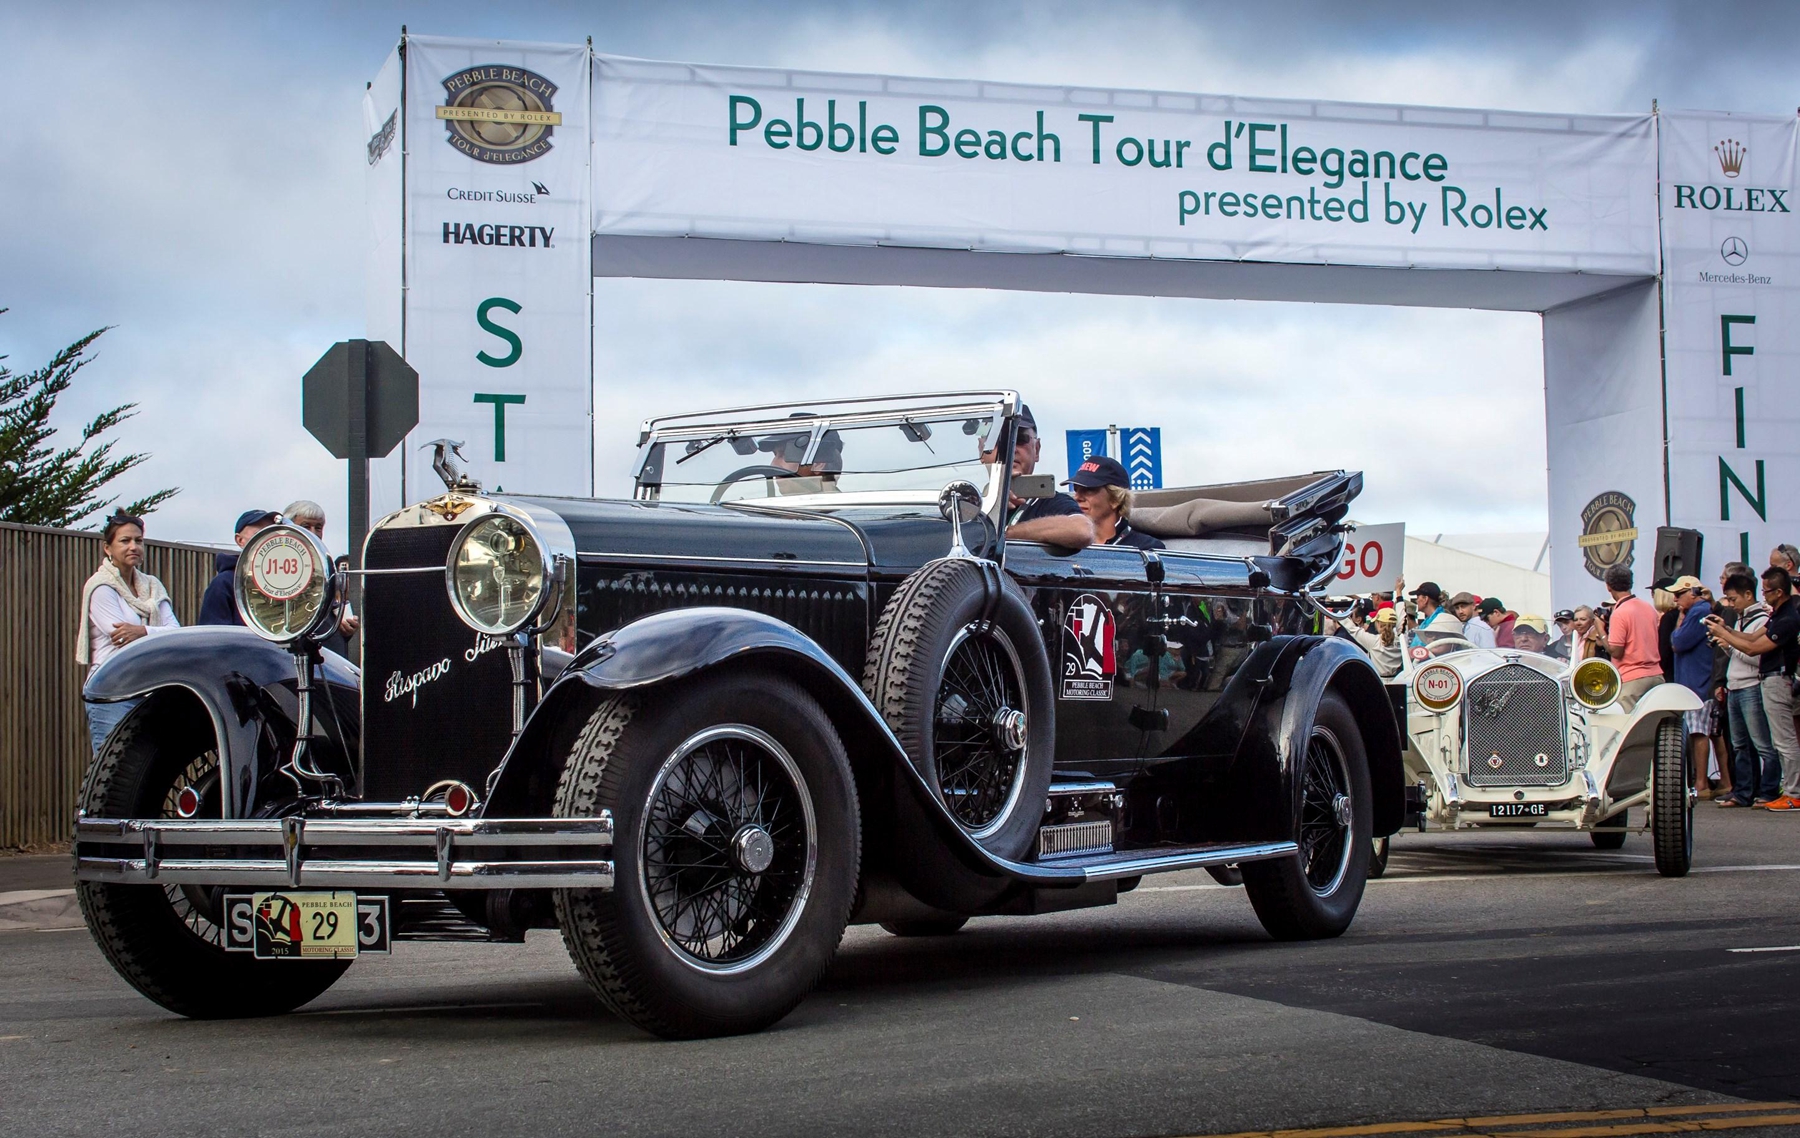 1929 Hispano-Suiza H6B Hibbard & Darrin Cabriolet de Ville at the start of the Pebble Beach Tour D'elegance presented by Rolex